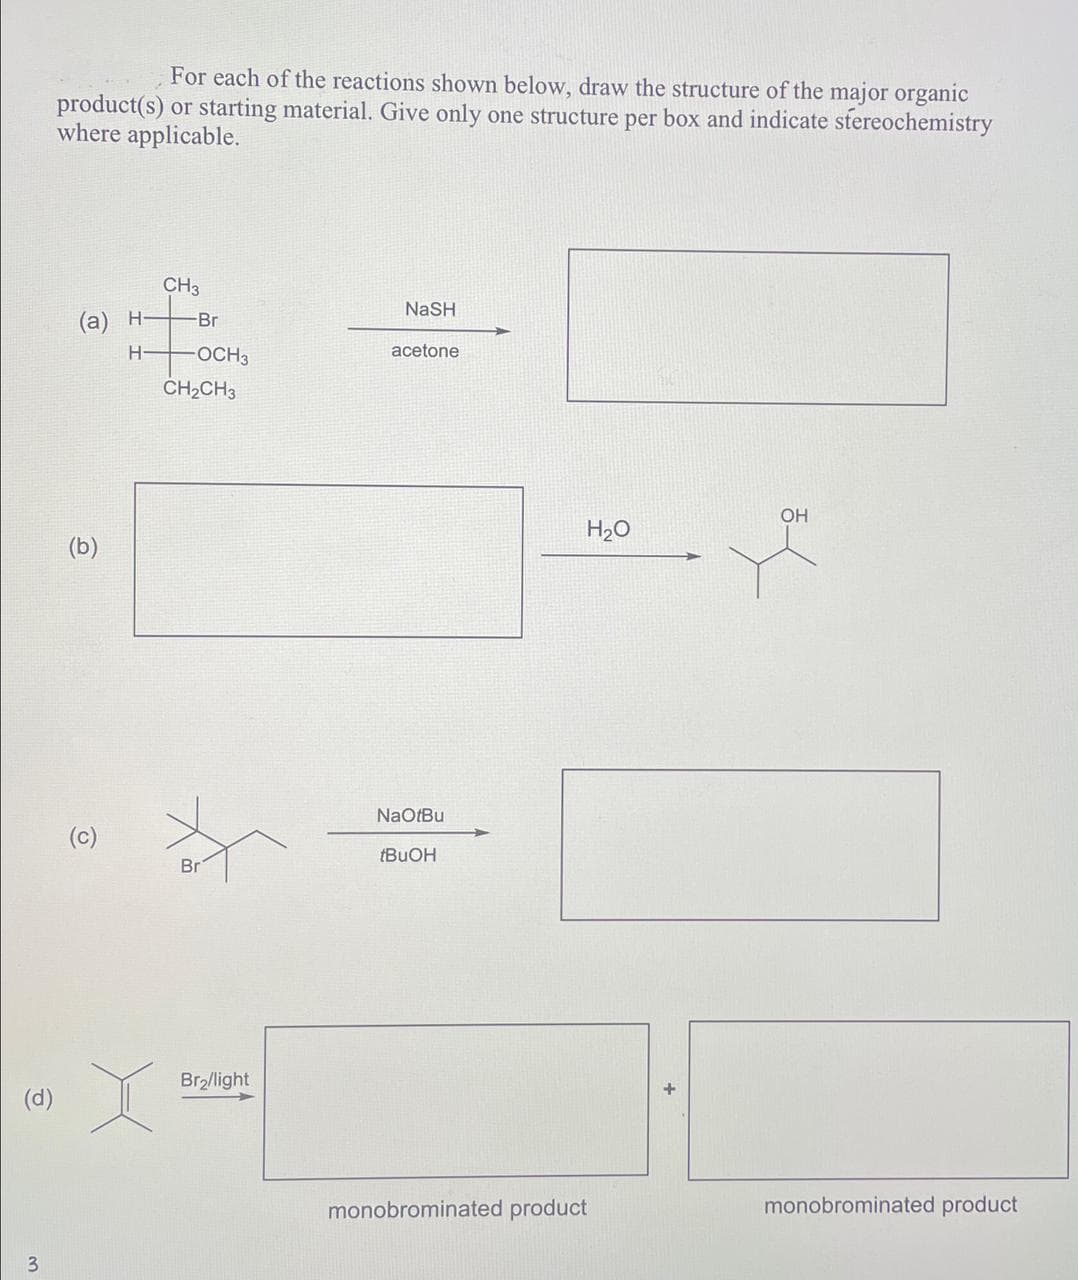 For each of the reactions shown below, draw the structure of the major organic
product(s) or starting material. Give only one structure per box and indicate stereochemistry
where applicable.
CH3
NaSH
(a) H-
-Br
H-
-OCH3
acetone
CH2CH3
(b)
(c)
fo
(d)
3
Br
Br₂/light
NaOtBu
tBuOH
OH
H₂O
monobrominated product
monobrominated product